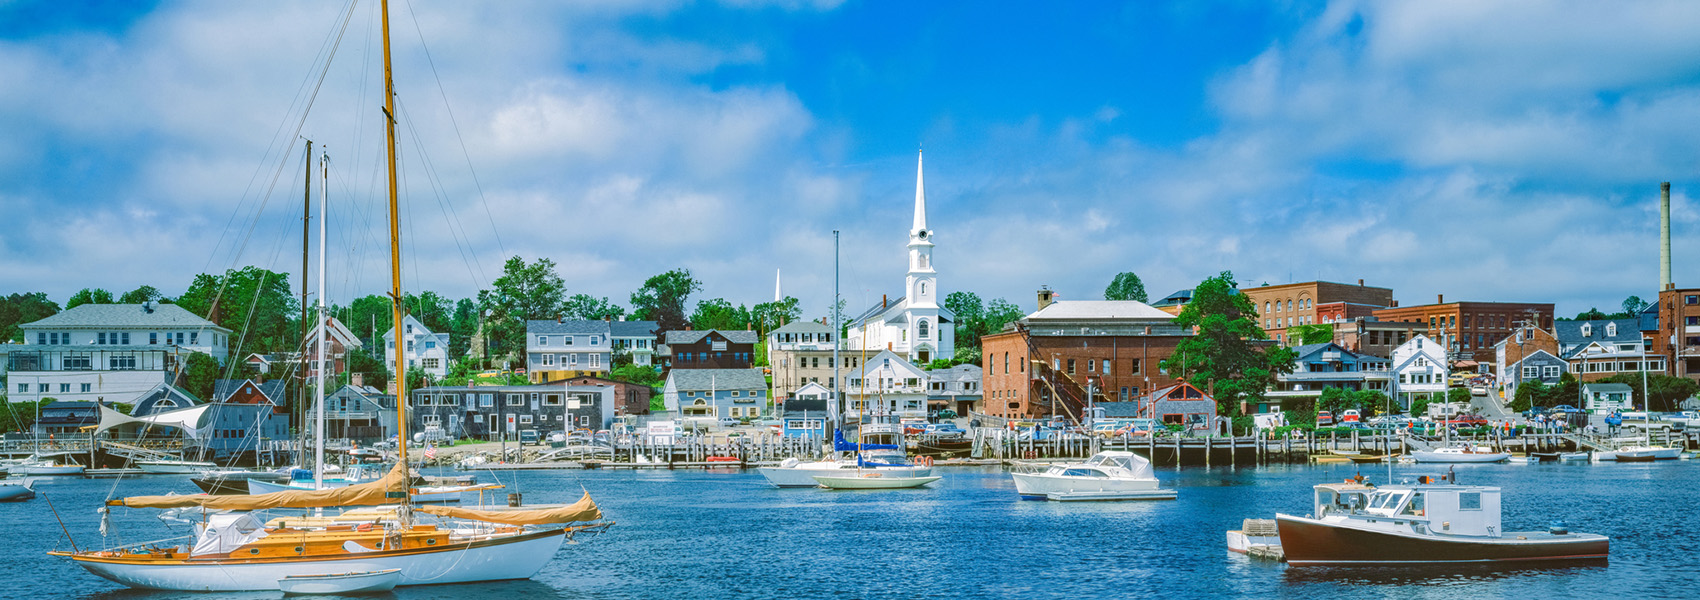 Camden Maine from water